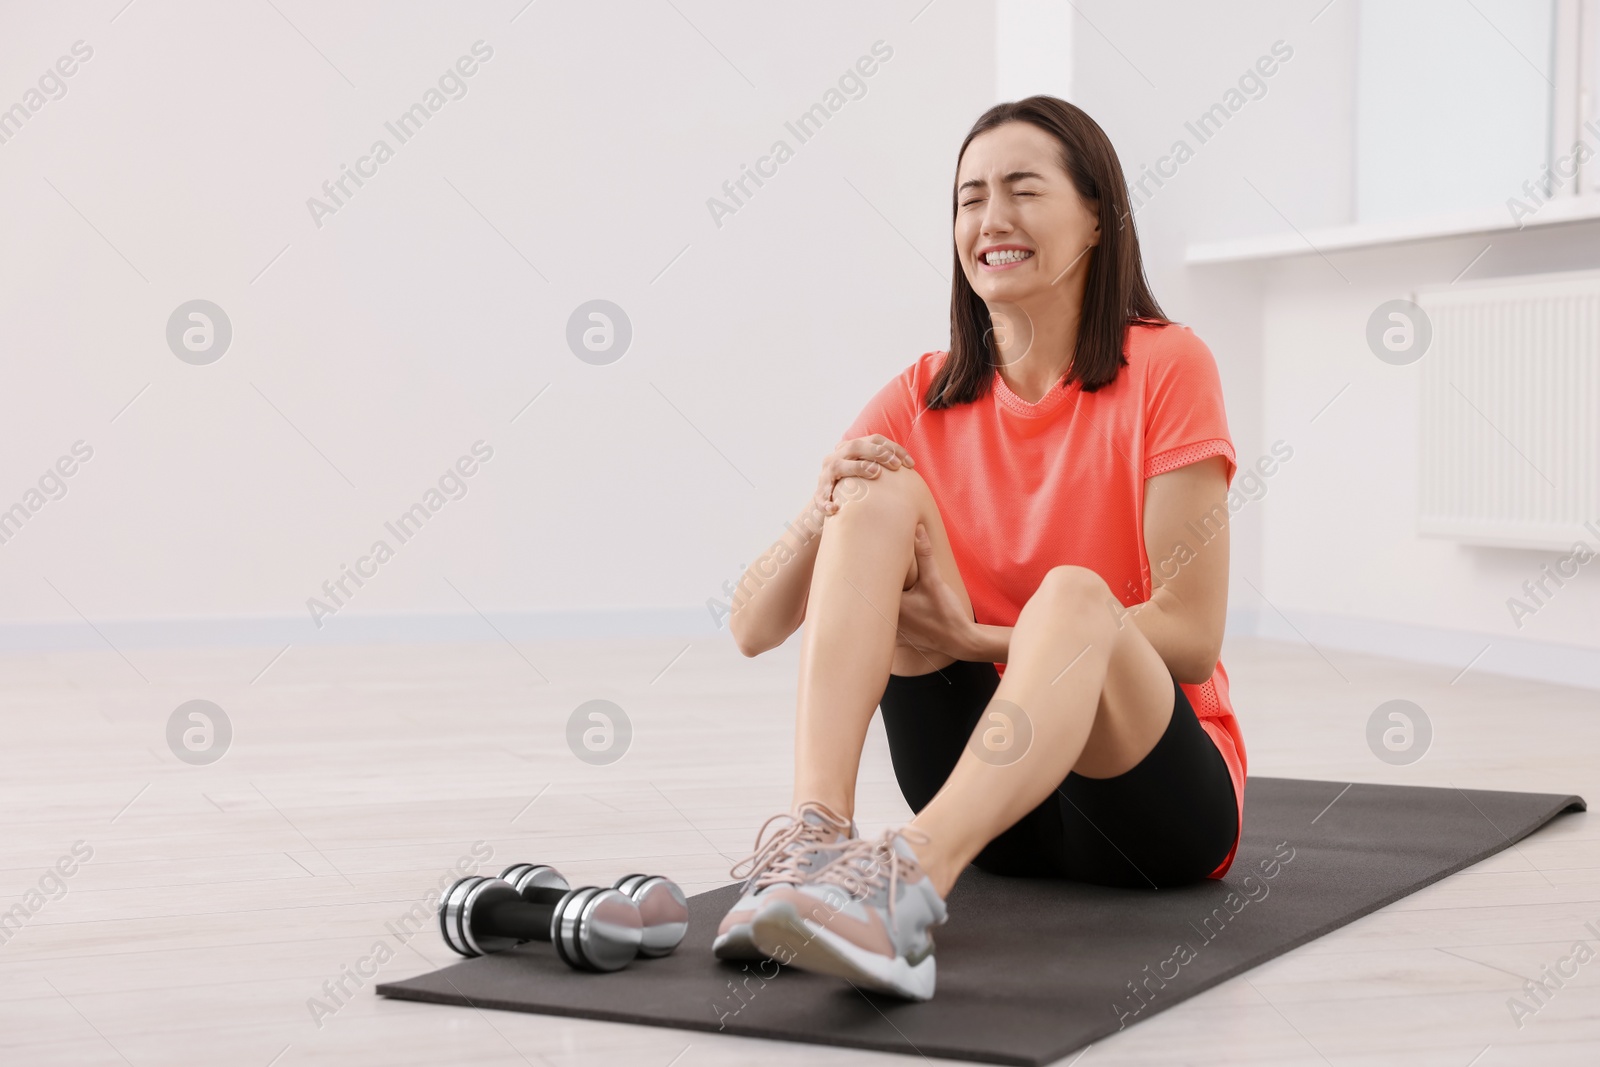 Photo of Young woman suffering from leg pain on exercise mat indoors, space for text